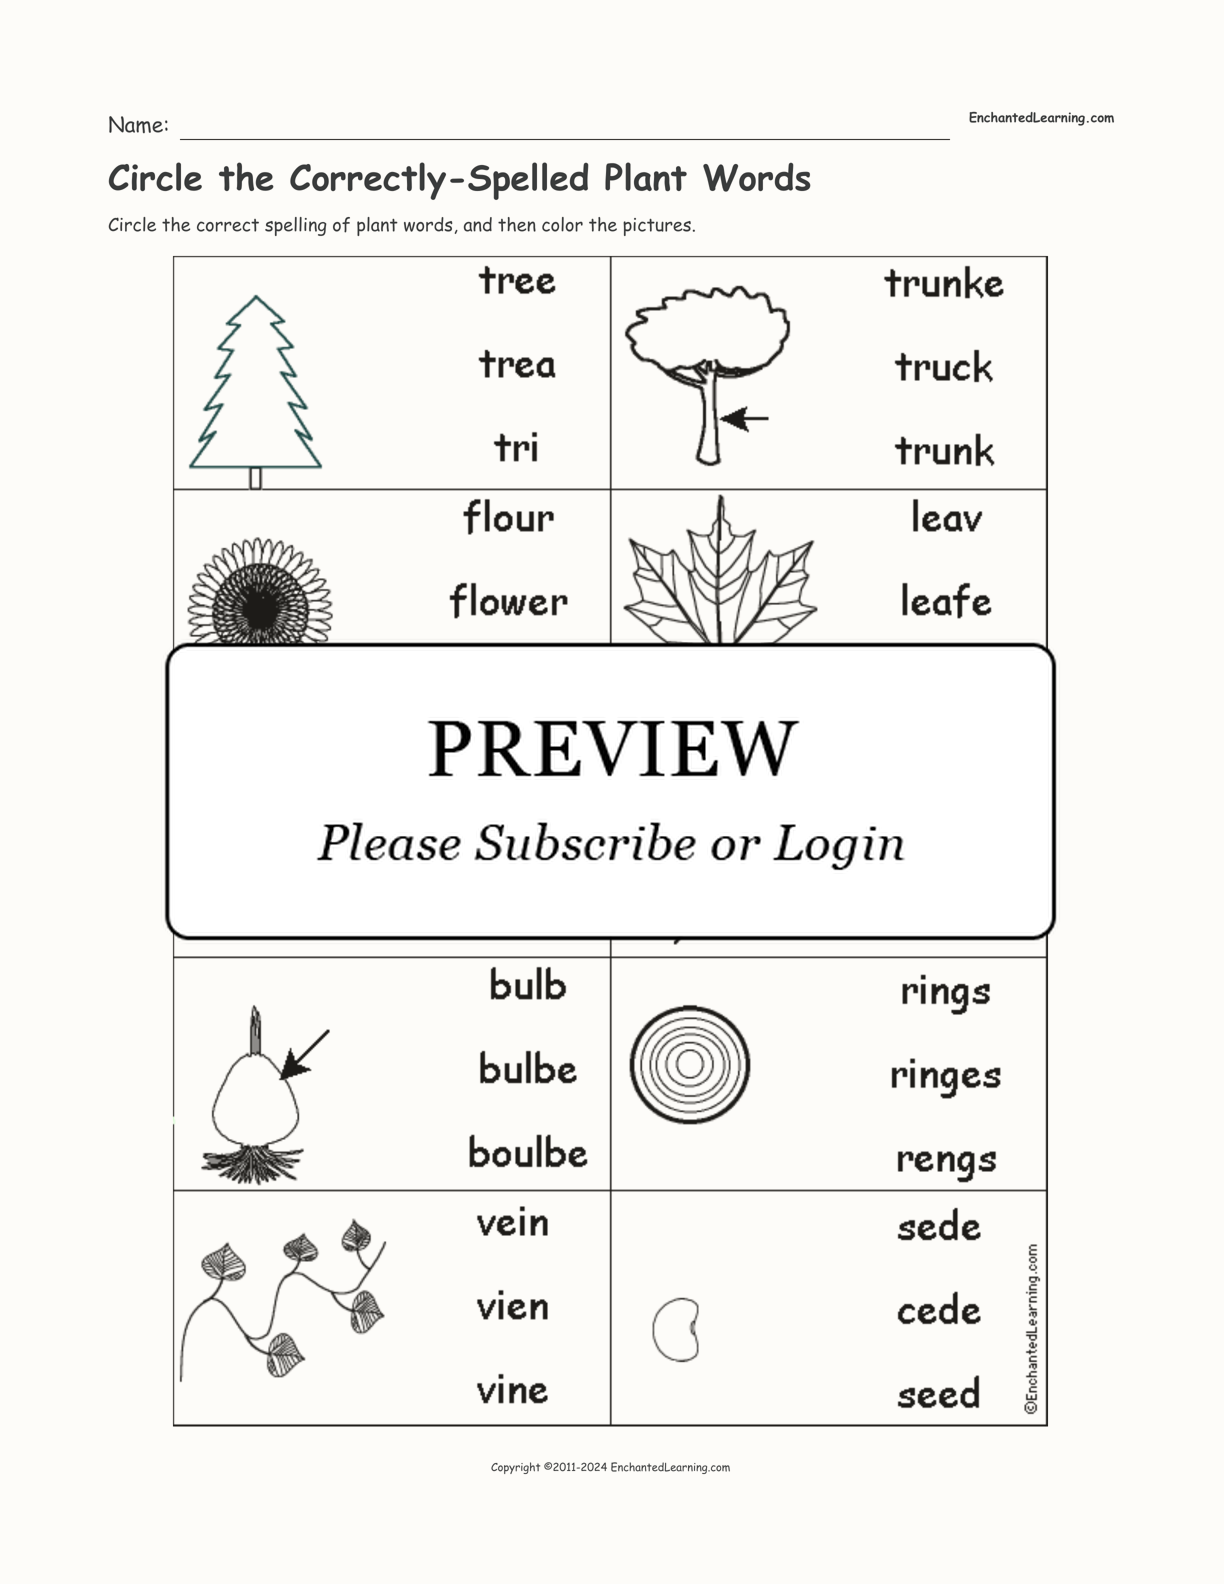 Circle the Correctly-Spelled Plant Words interactive worksheet page 1